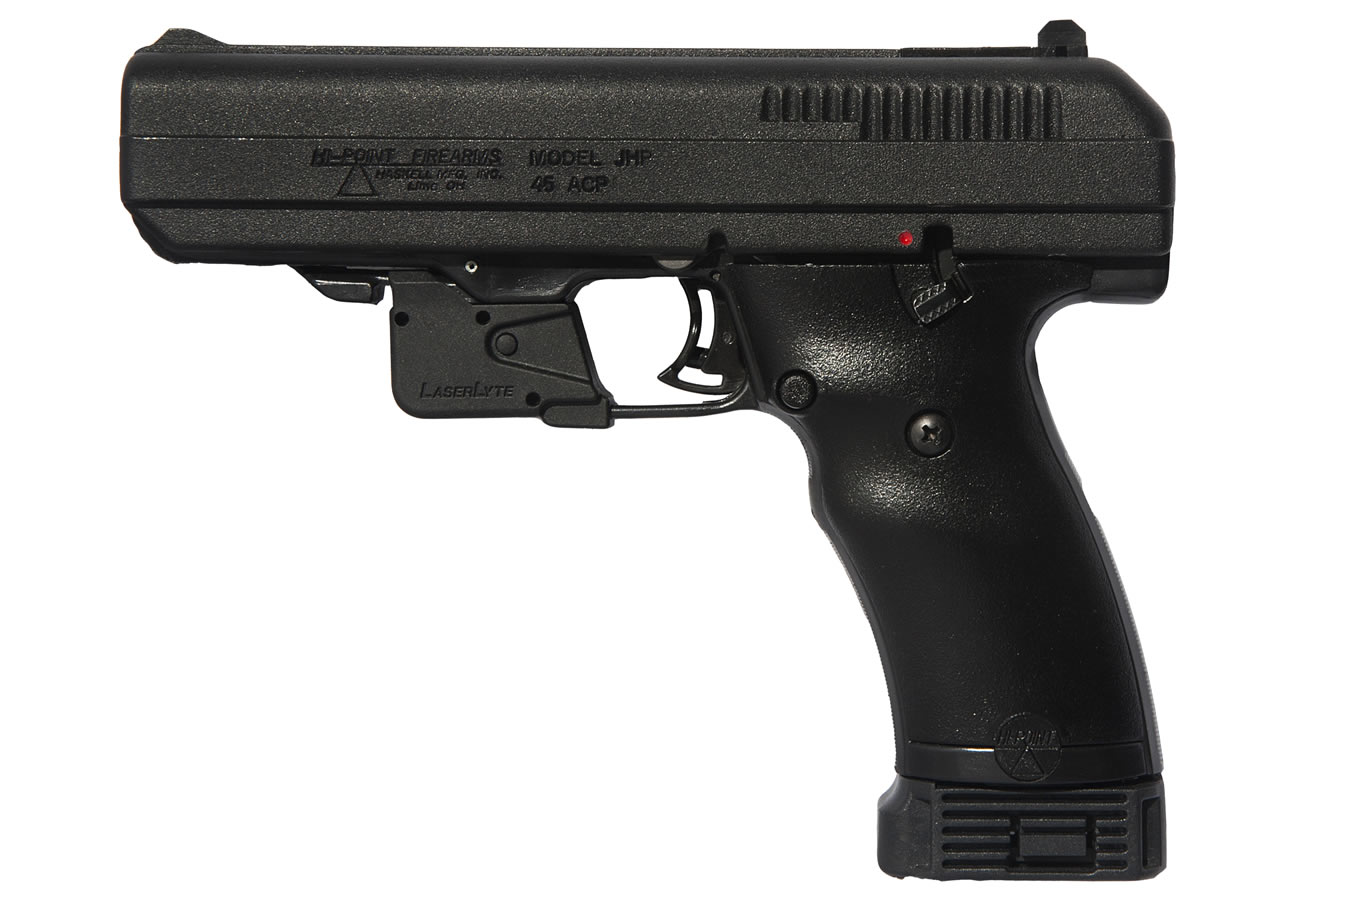 HI POINT JHP 45 ACP WITH LASER